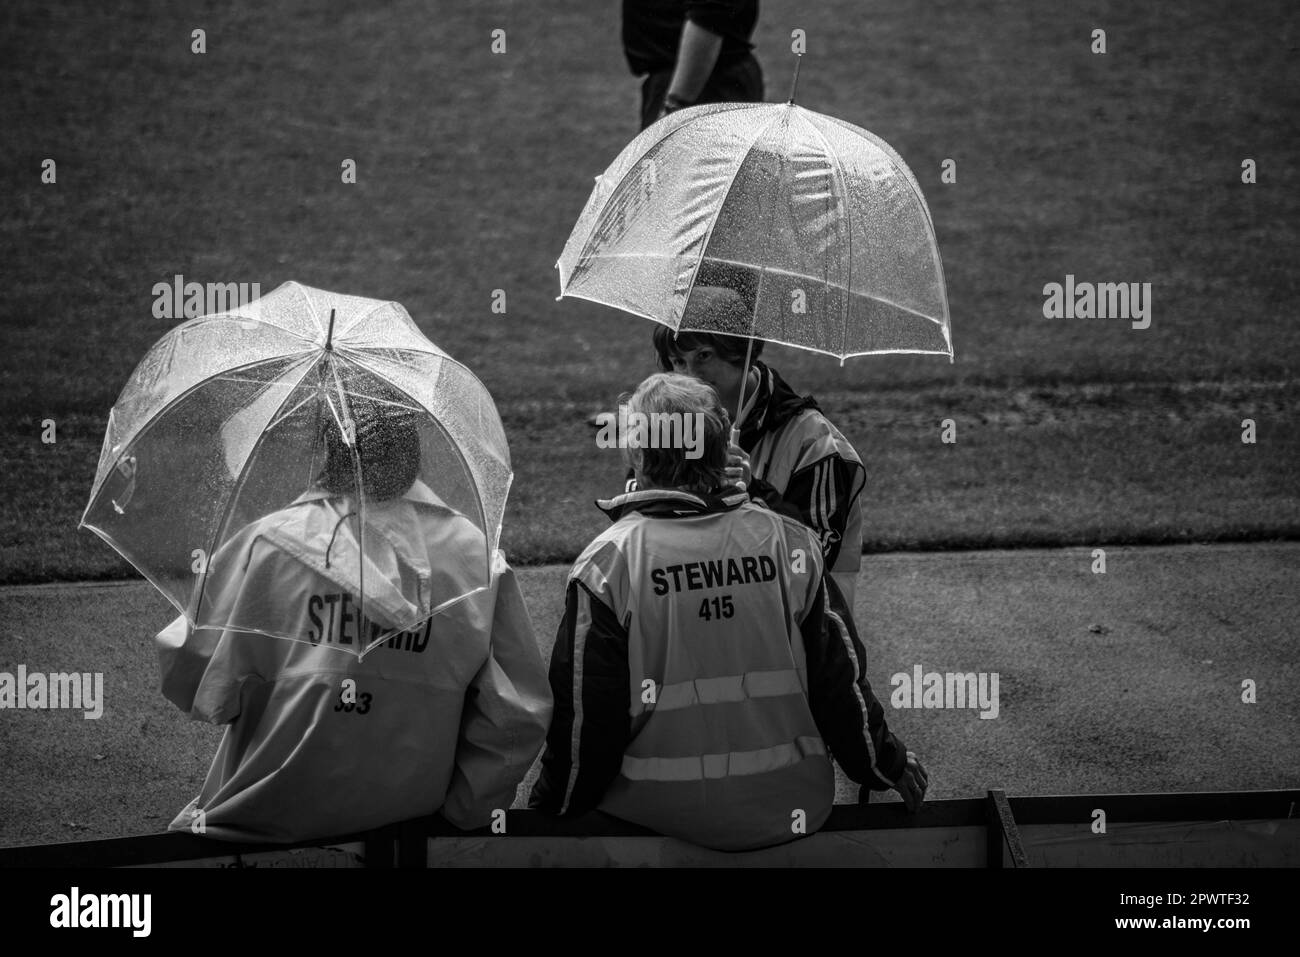 Black and white image of 3 stewards standing at the sidelines of a football match having a discussion using clear umbrellas at Upton Park, London Stock Photo